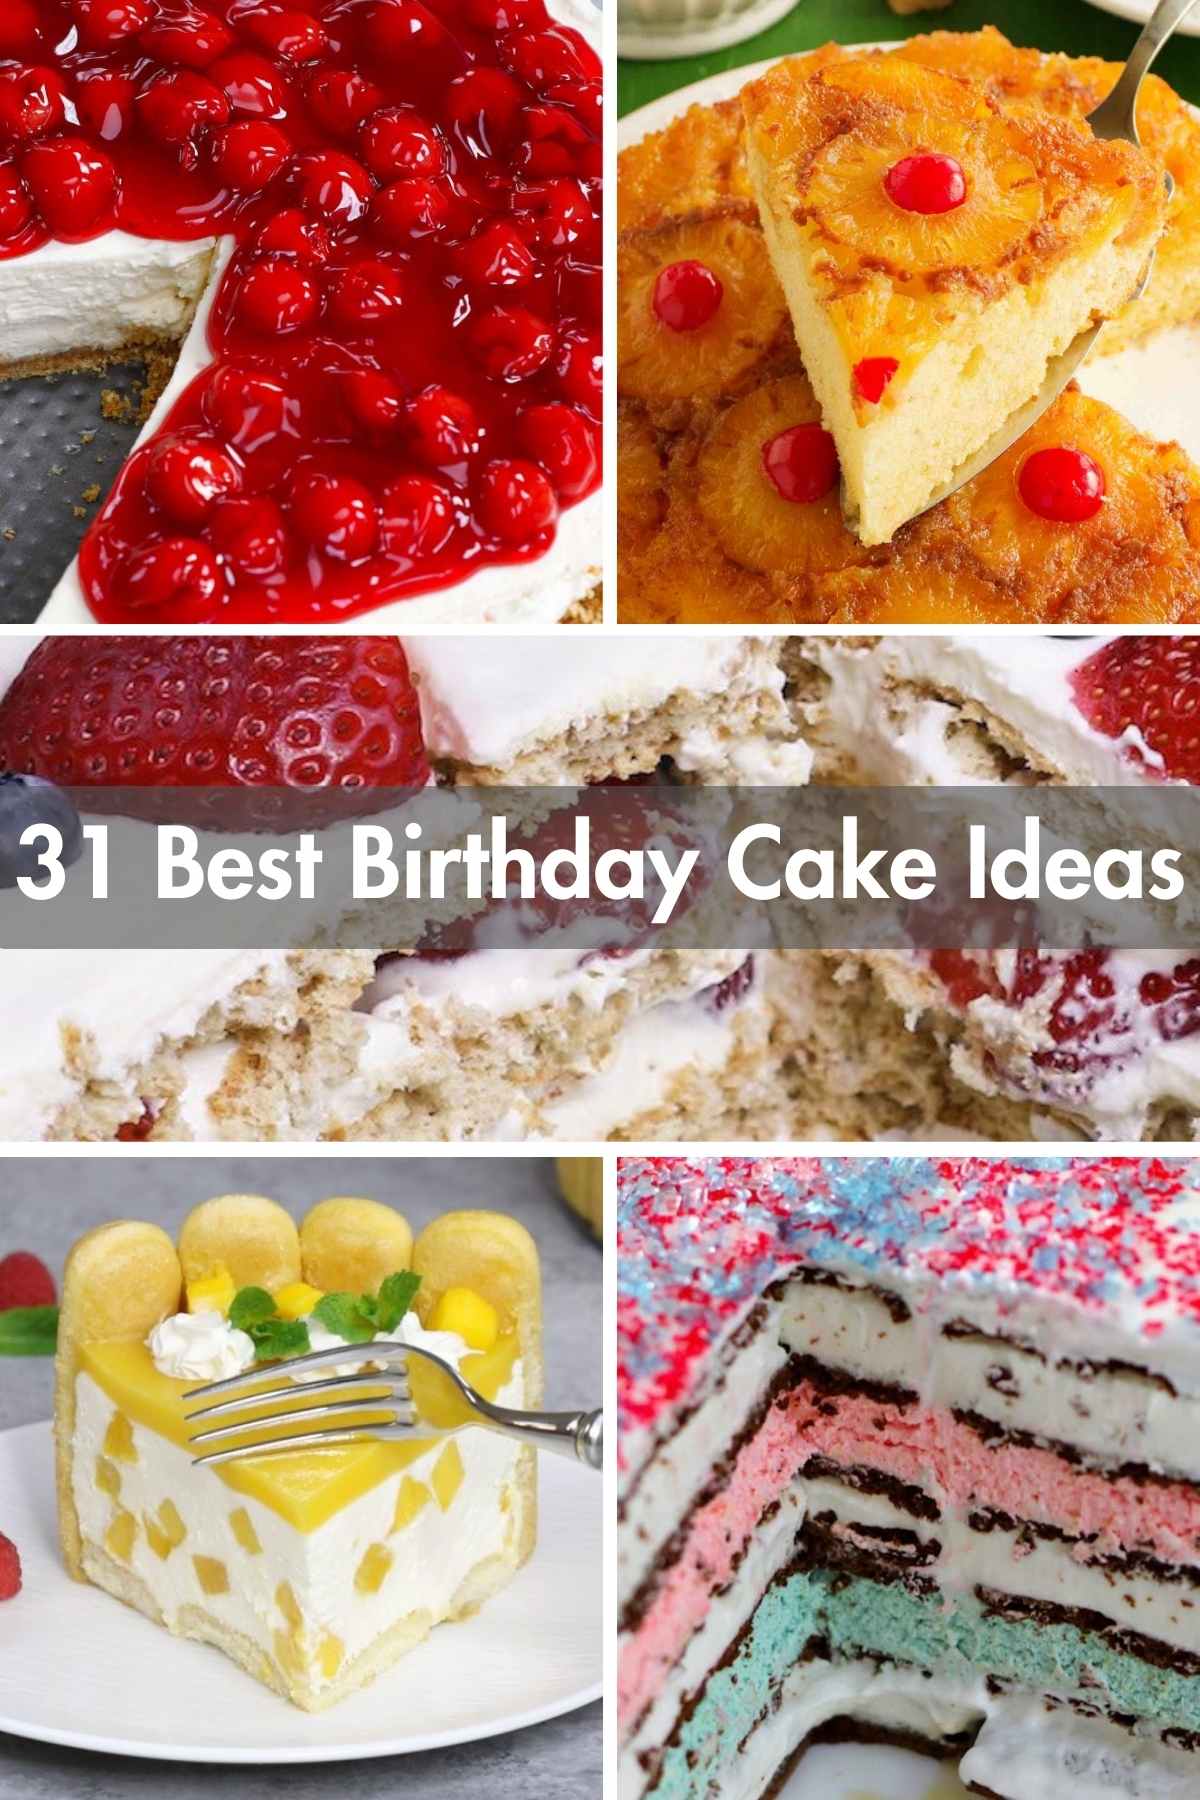 Whether you are planning an 18th, 30th, 40th, 50th, or 80th birthday party, you'll get inspired by this collection of 31 best Birthday Cake Ideas. Whether you prefer a traditional frosted cake, chocolate cake, sweet cupcakes, or even a cheesecake, a homemade creation is the best way to show someone they’re special. 